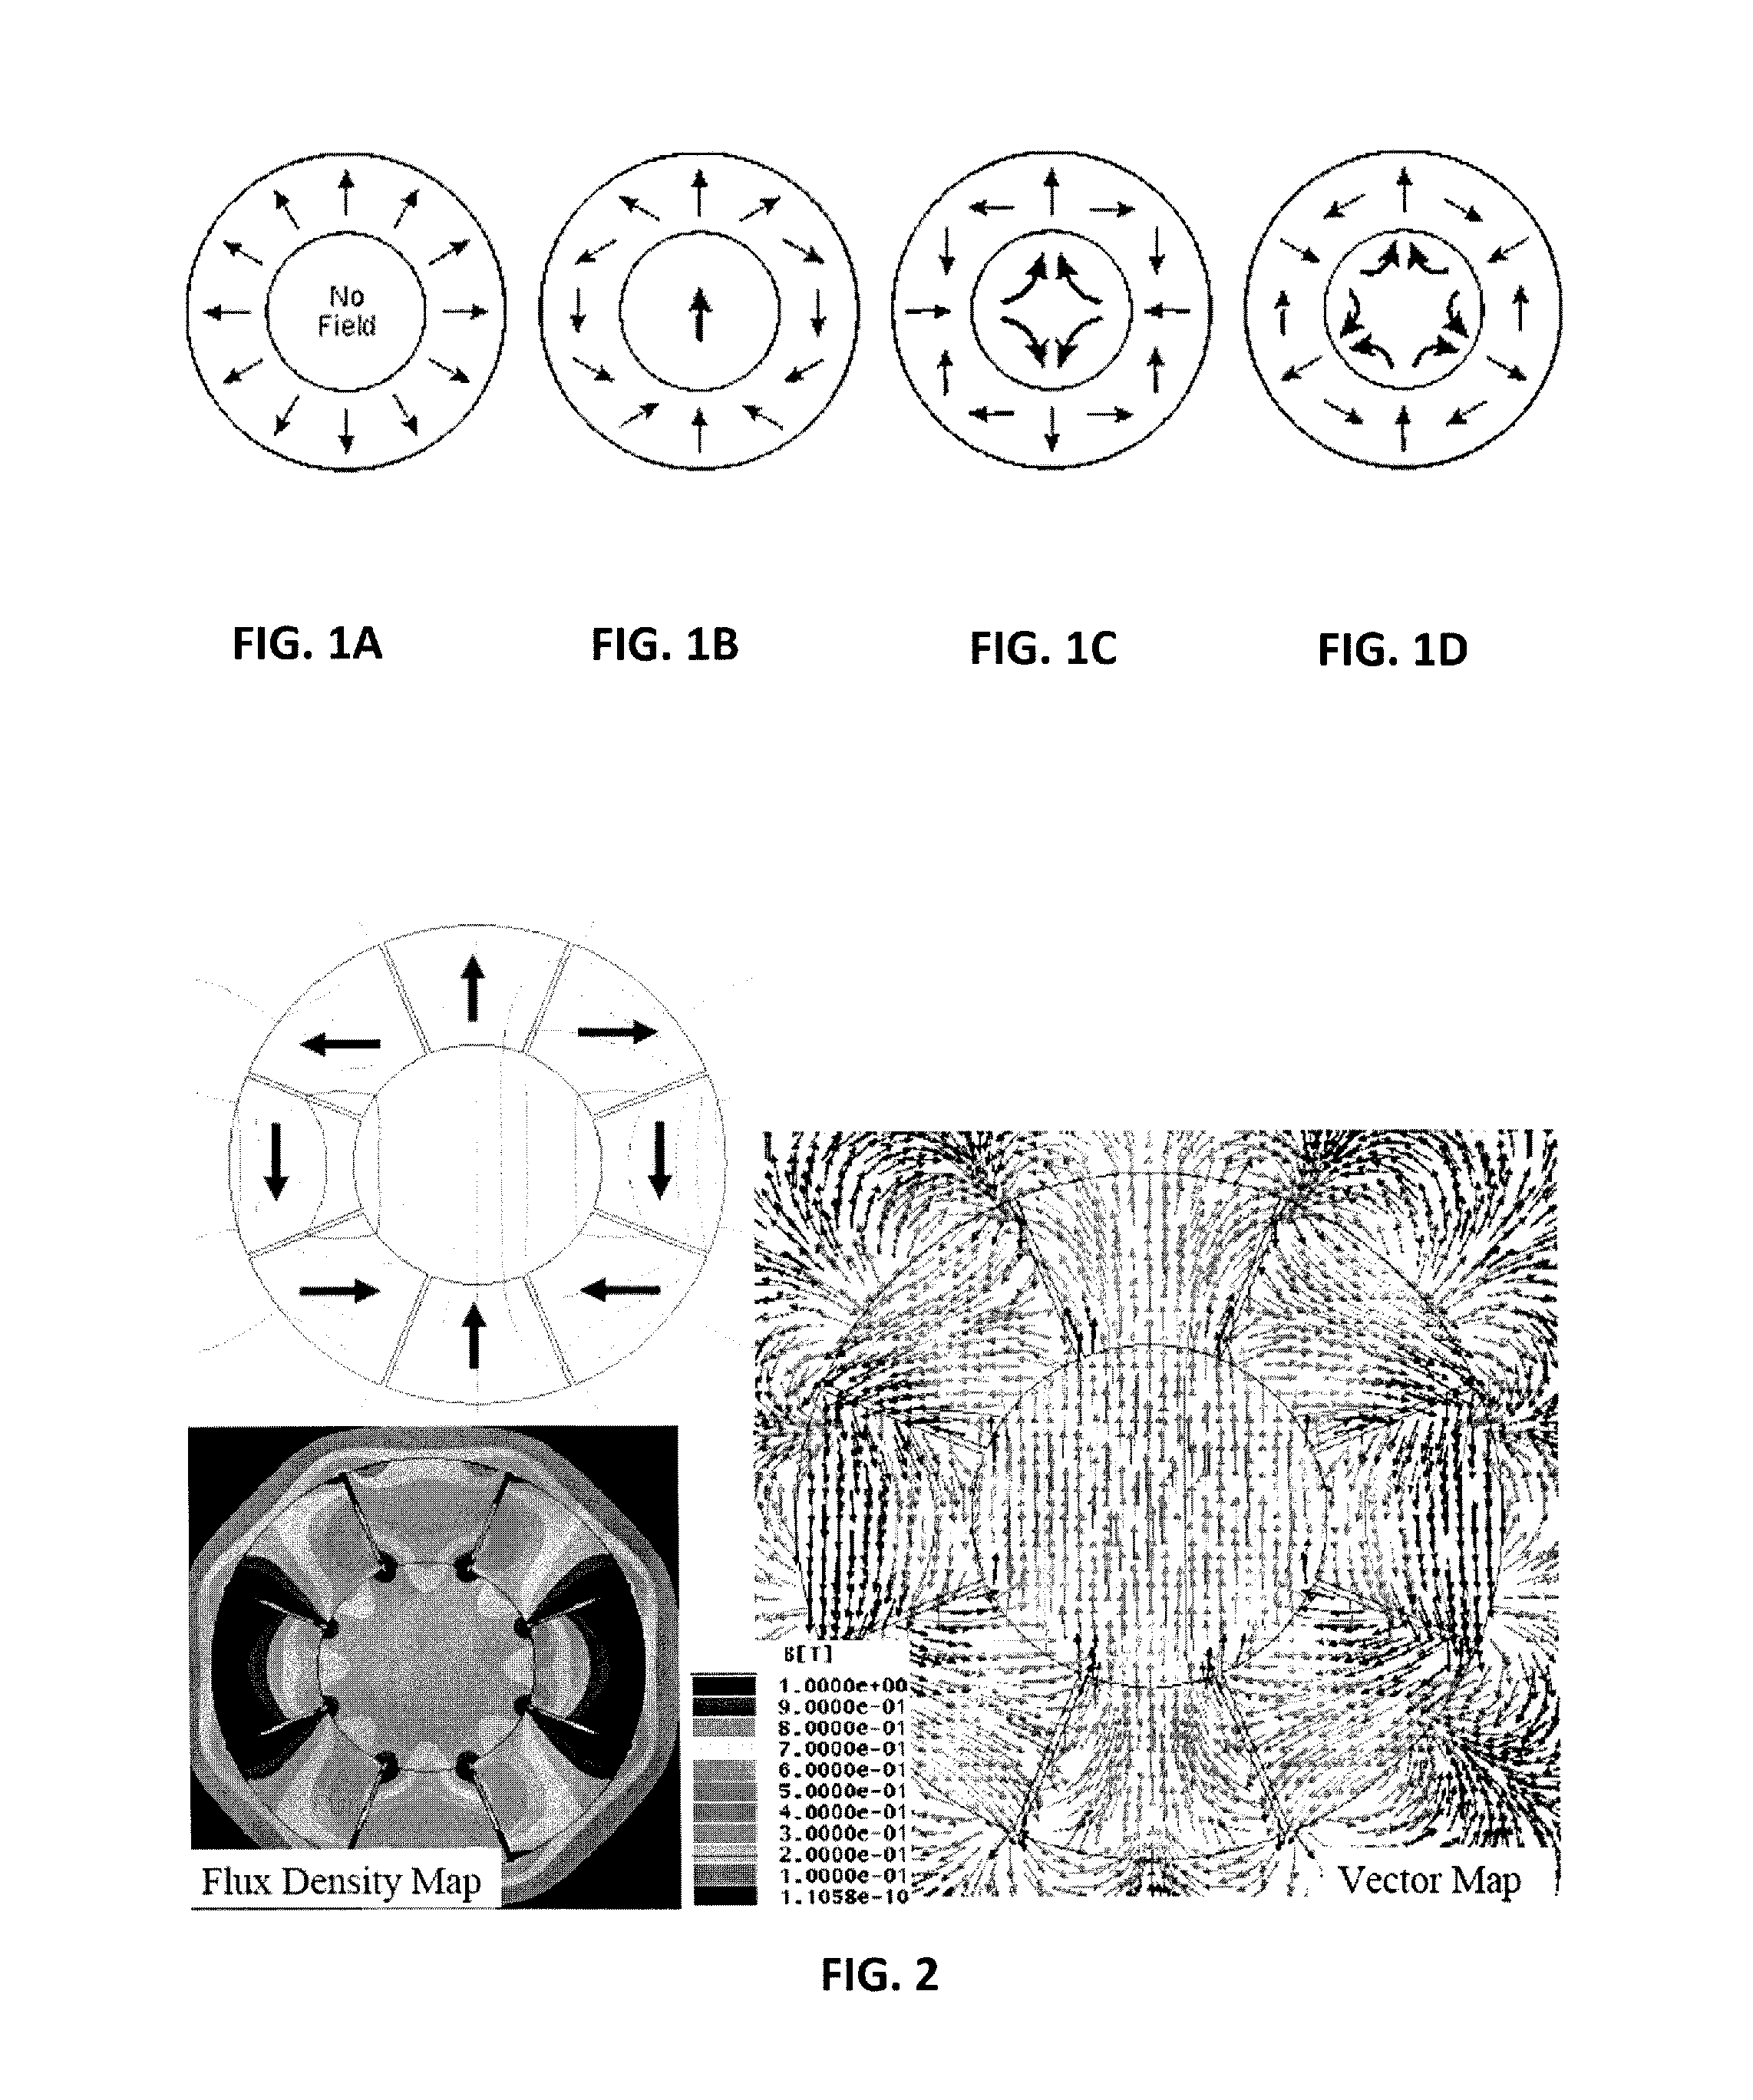 Method and apparatus for motional/vibrational energy harvesting via electromagnetic induction using a magnet array